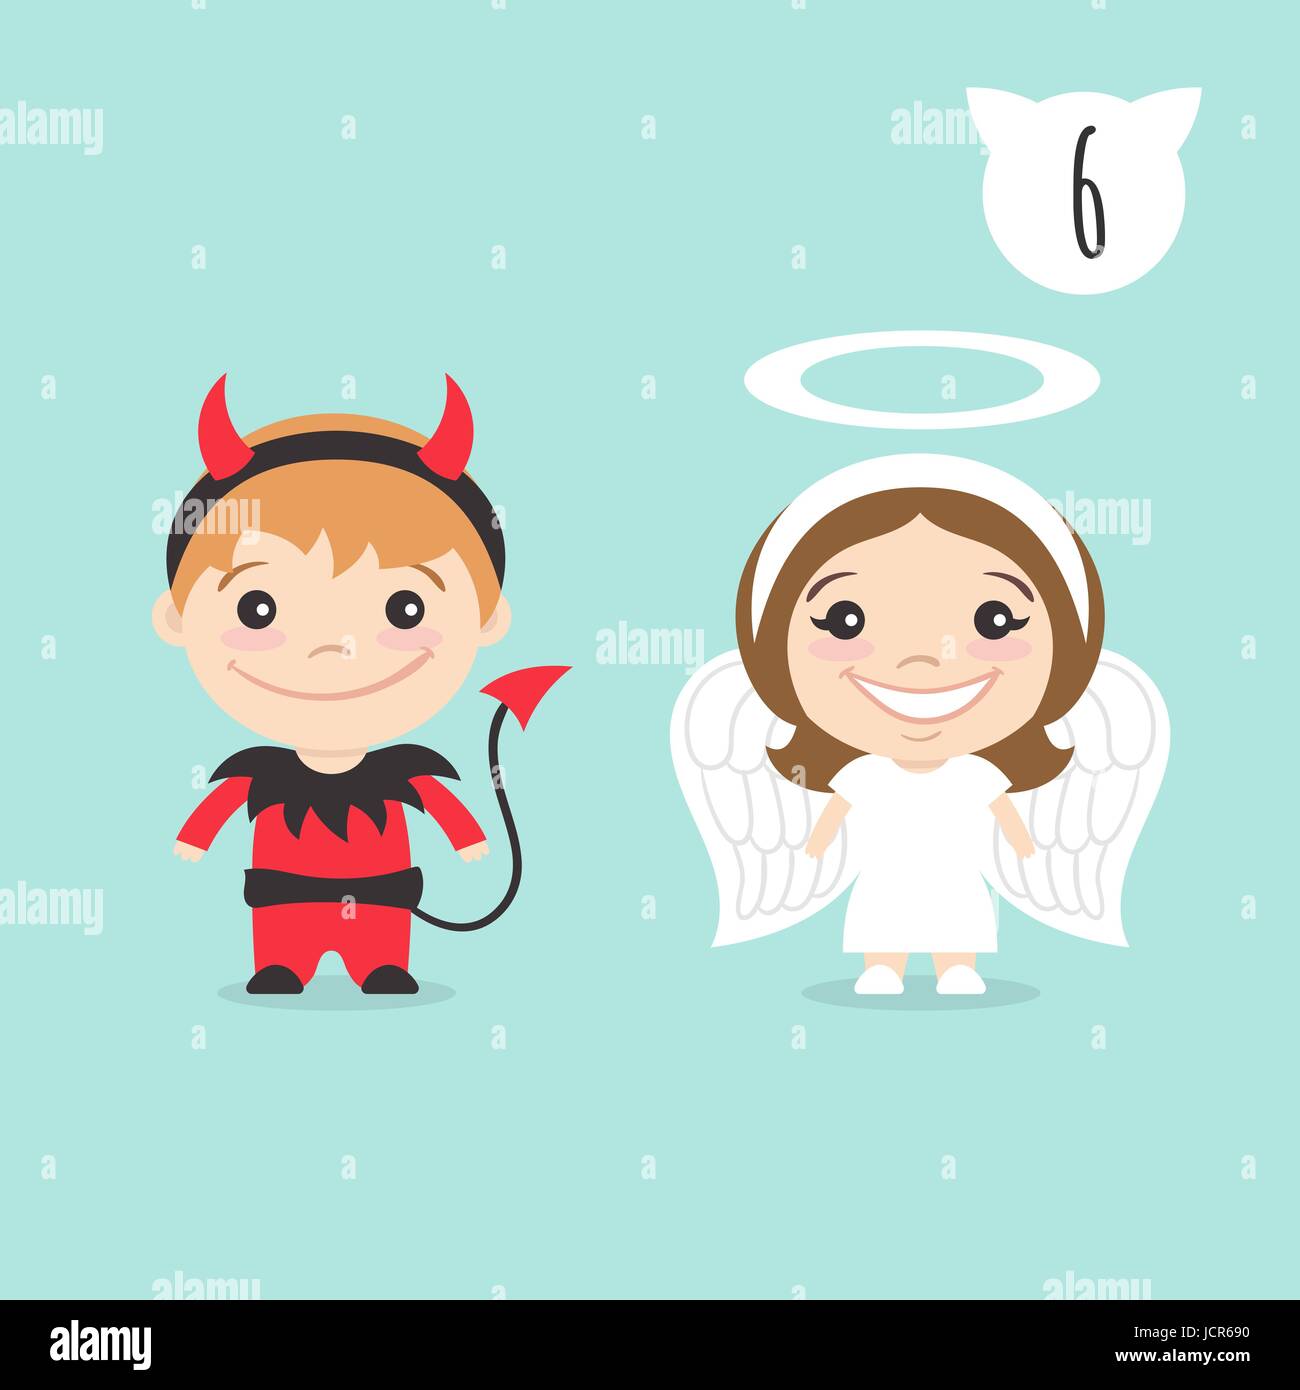 Vector illustration of two happy cute kids characters. Boy in imp or little devil costume and a girl in angel costume. Stock Vector